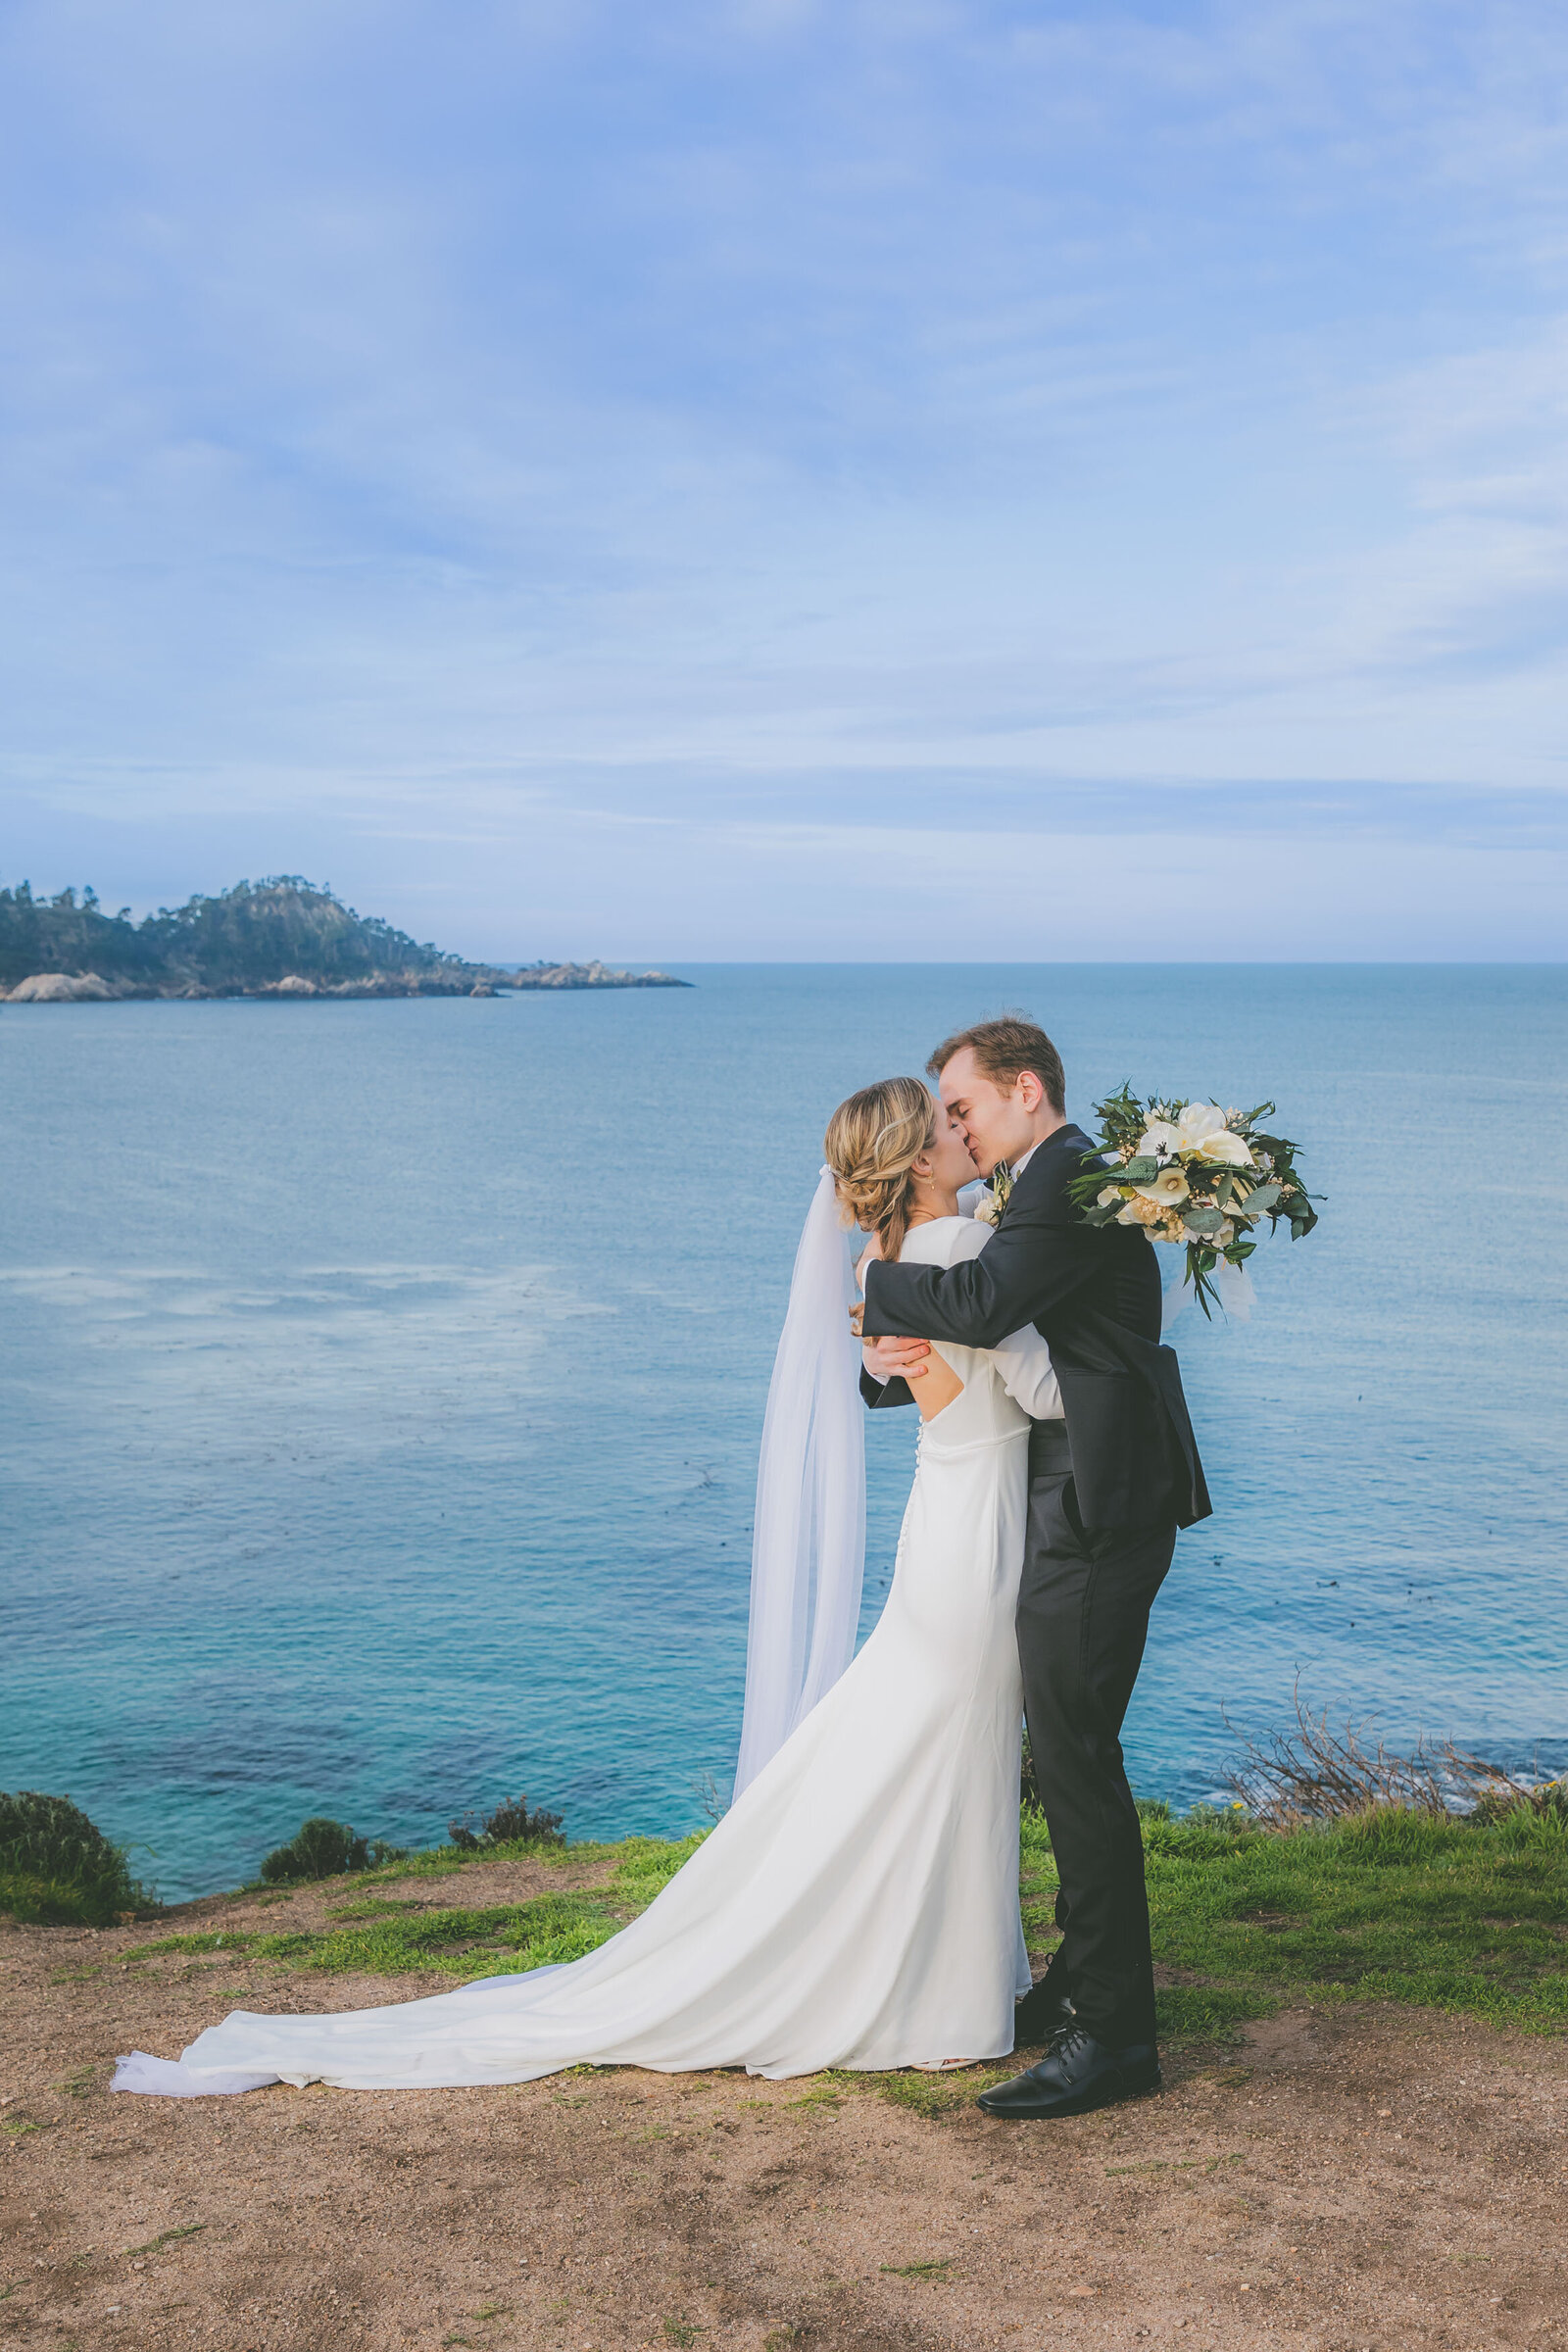 Newlyweds kiss with an ocean view in the background during their sunrise elopement..